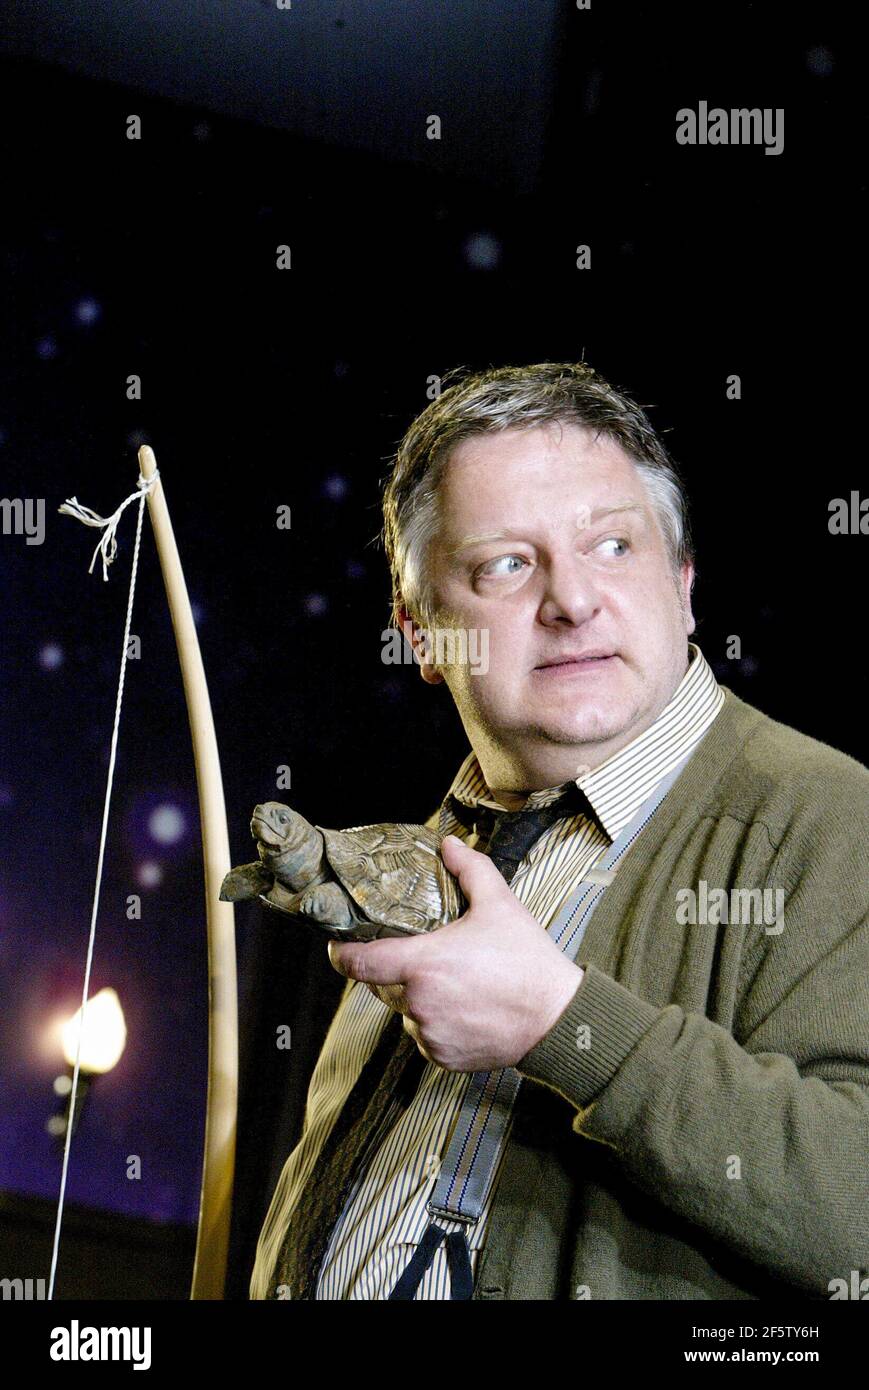 Simon Russell Beale (George Moore) in JUMPERS by Tom Stoppard at the Lyttelton Theatre, National Theatre (NT), London SE1  19/06/2003  set design: Vicki Mortimer  costumes: Nicky Gillibrand  lighting: Paule Constable  choreography: Aidan Treays  director: David Leveaux Stock Photo